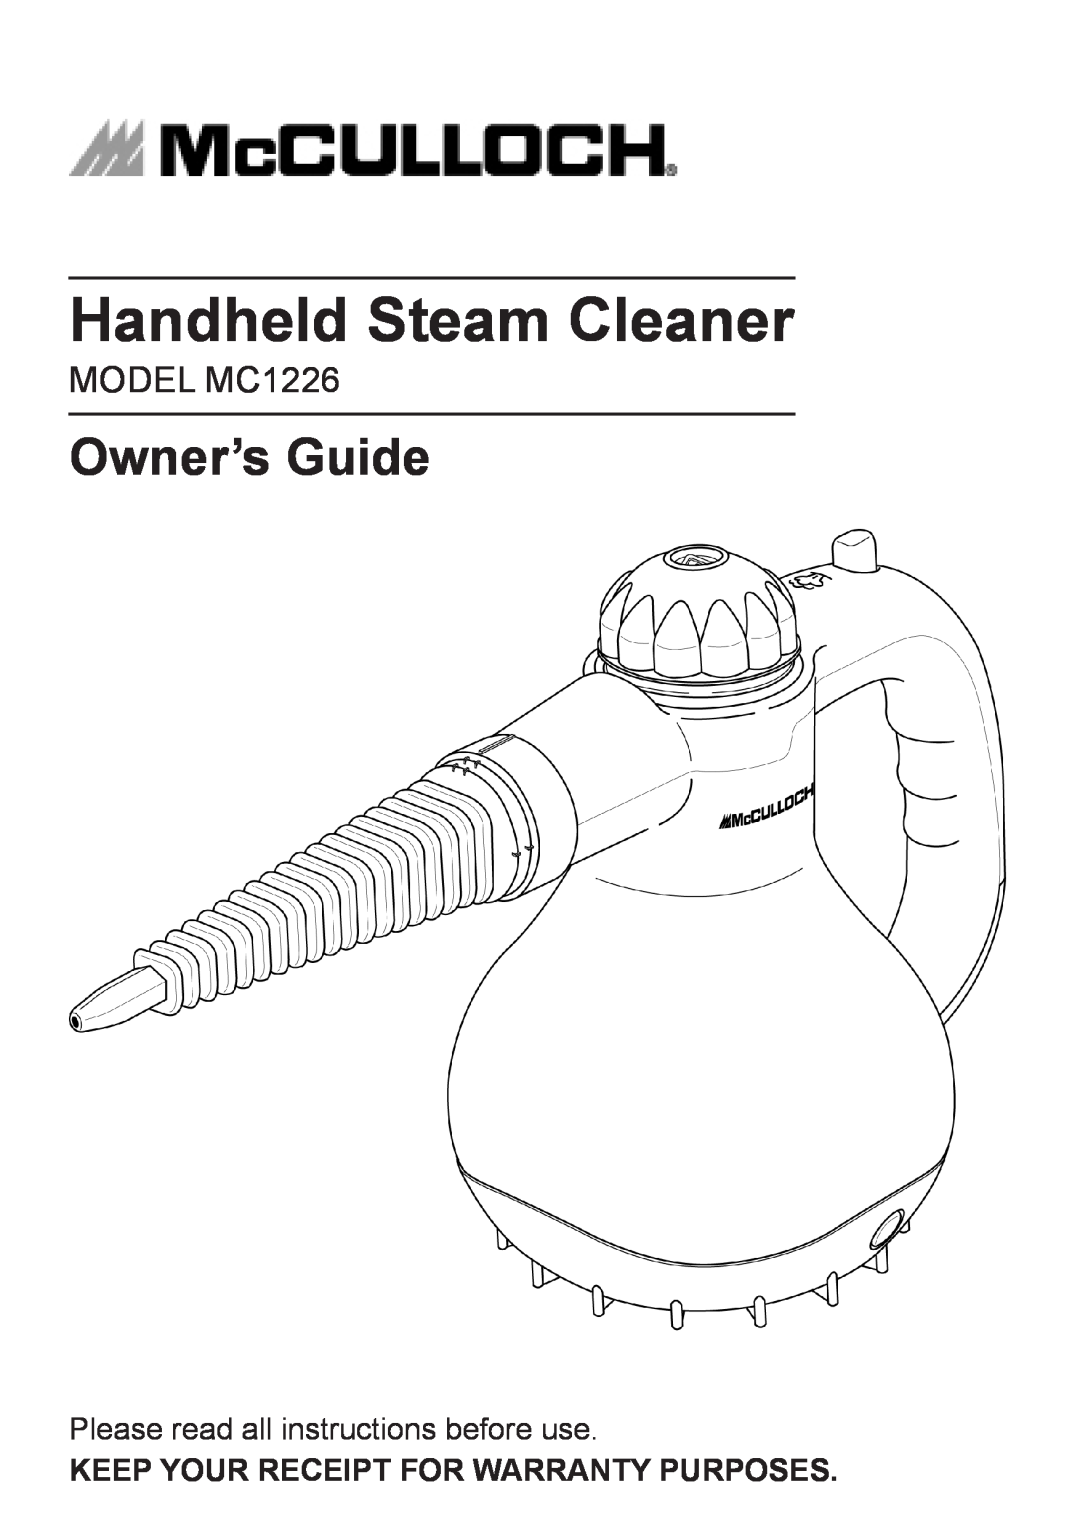 McCulloch warranty Owner’s Guide, Please read all instructions before use, Handheld Steam Cleaner, MODEL MC1226 